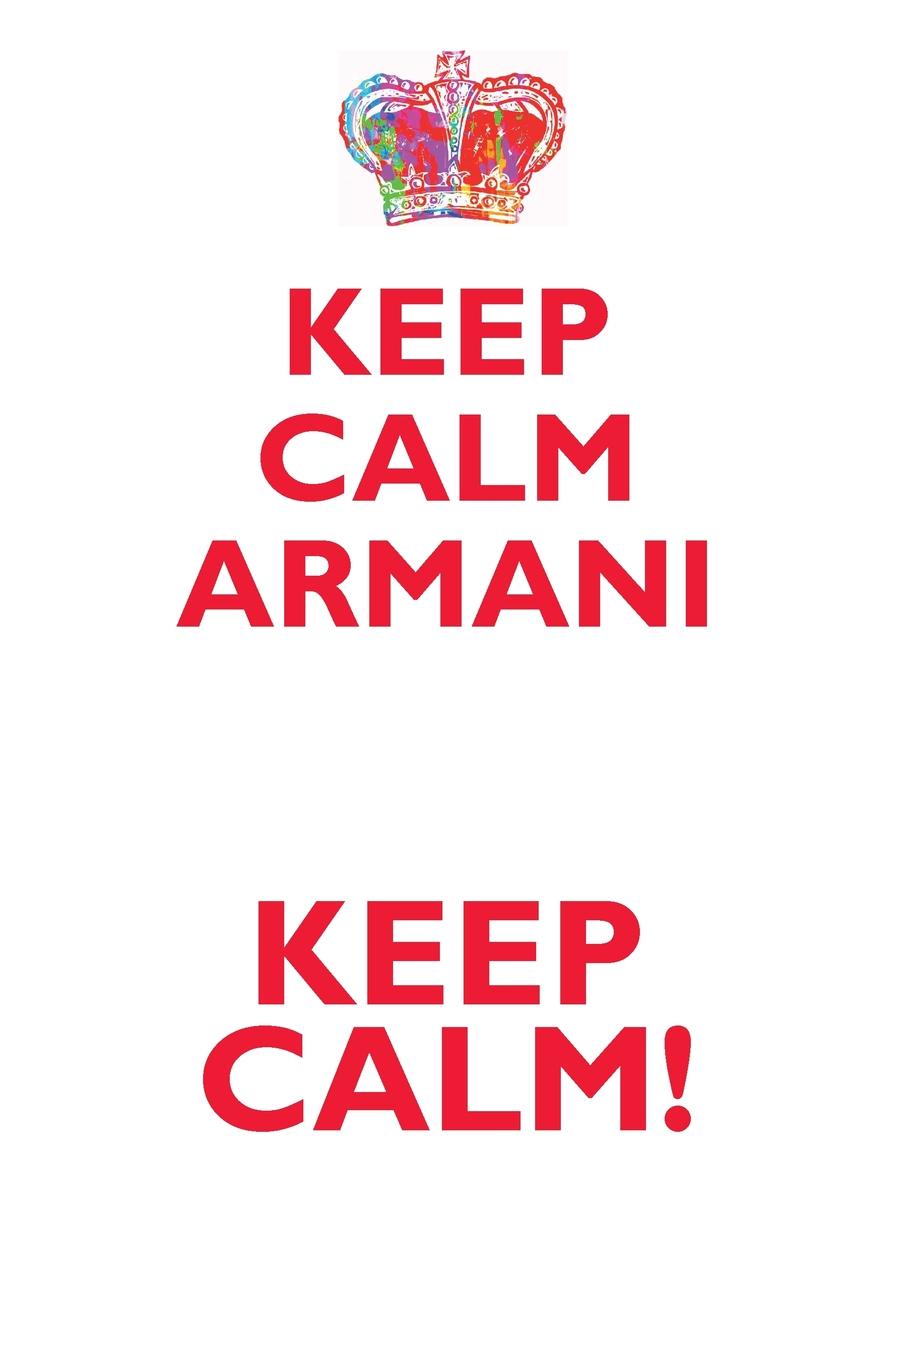 KEEP CALM ARMANI! AFFIRMATIONS WORKBOOK Positive Affirmations Workbook Includes. Mentoring Questions, Guidance, Supporting You